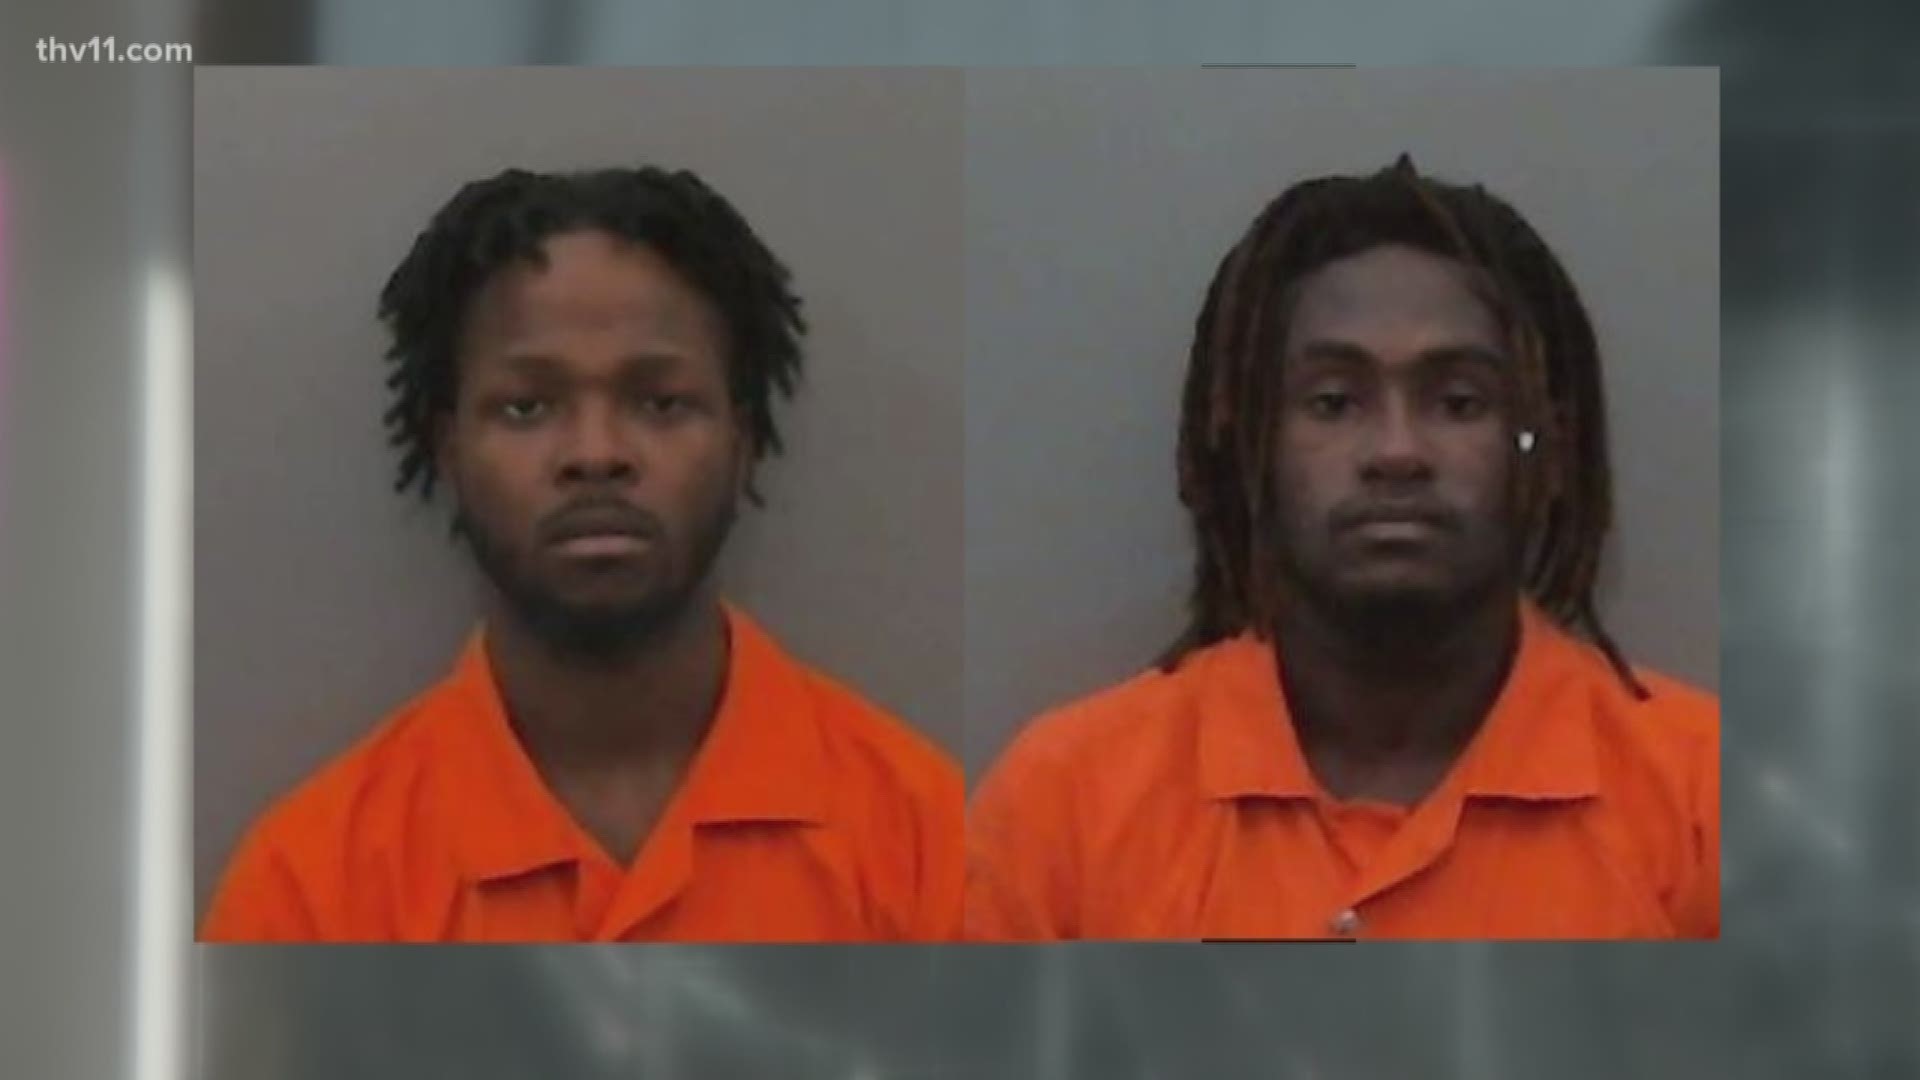 Two 21-year-old men were arrested early this morning for the murder of a Pine Bluff pawn shop owner.